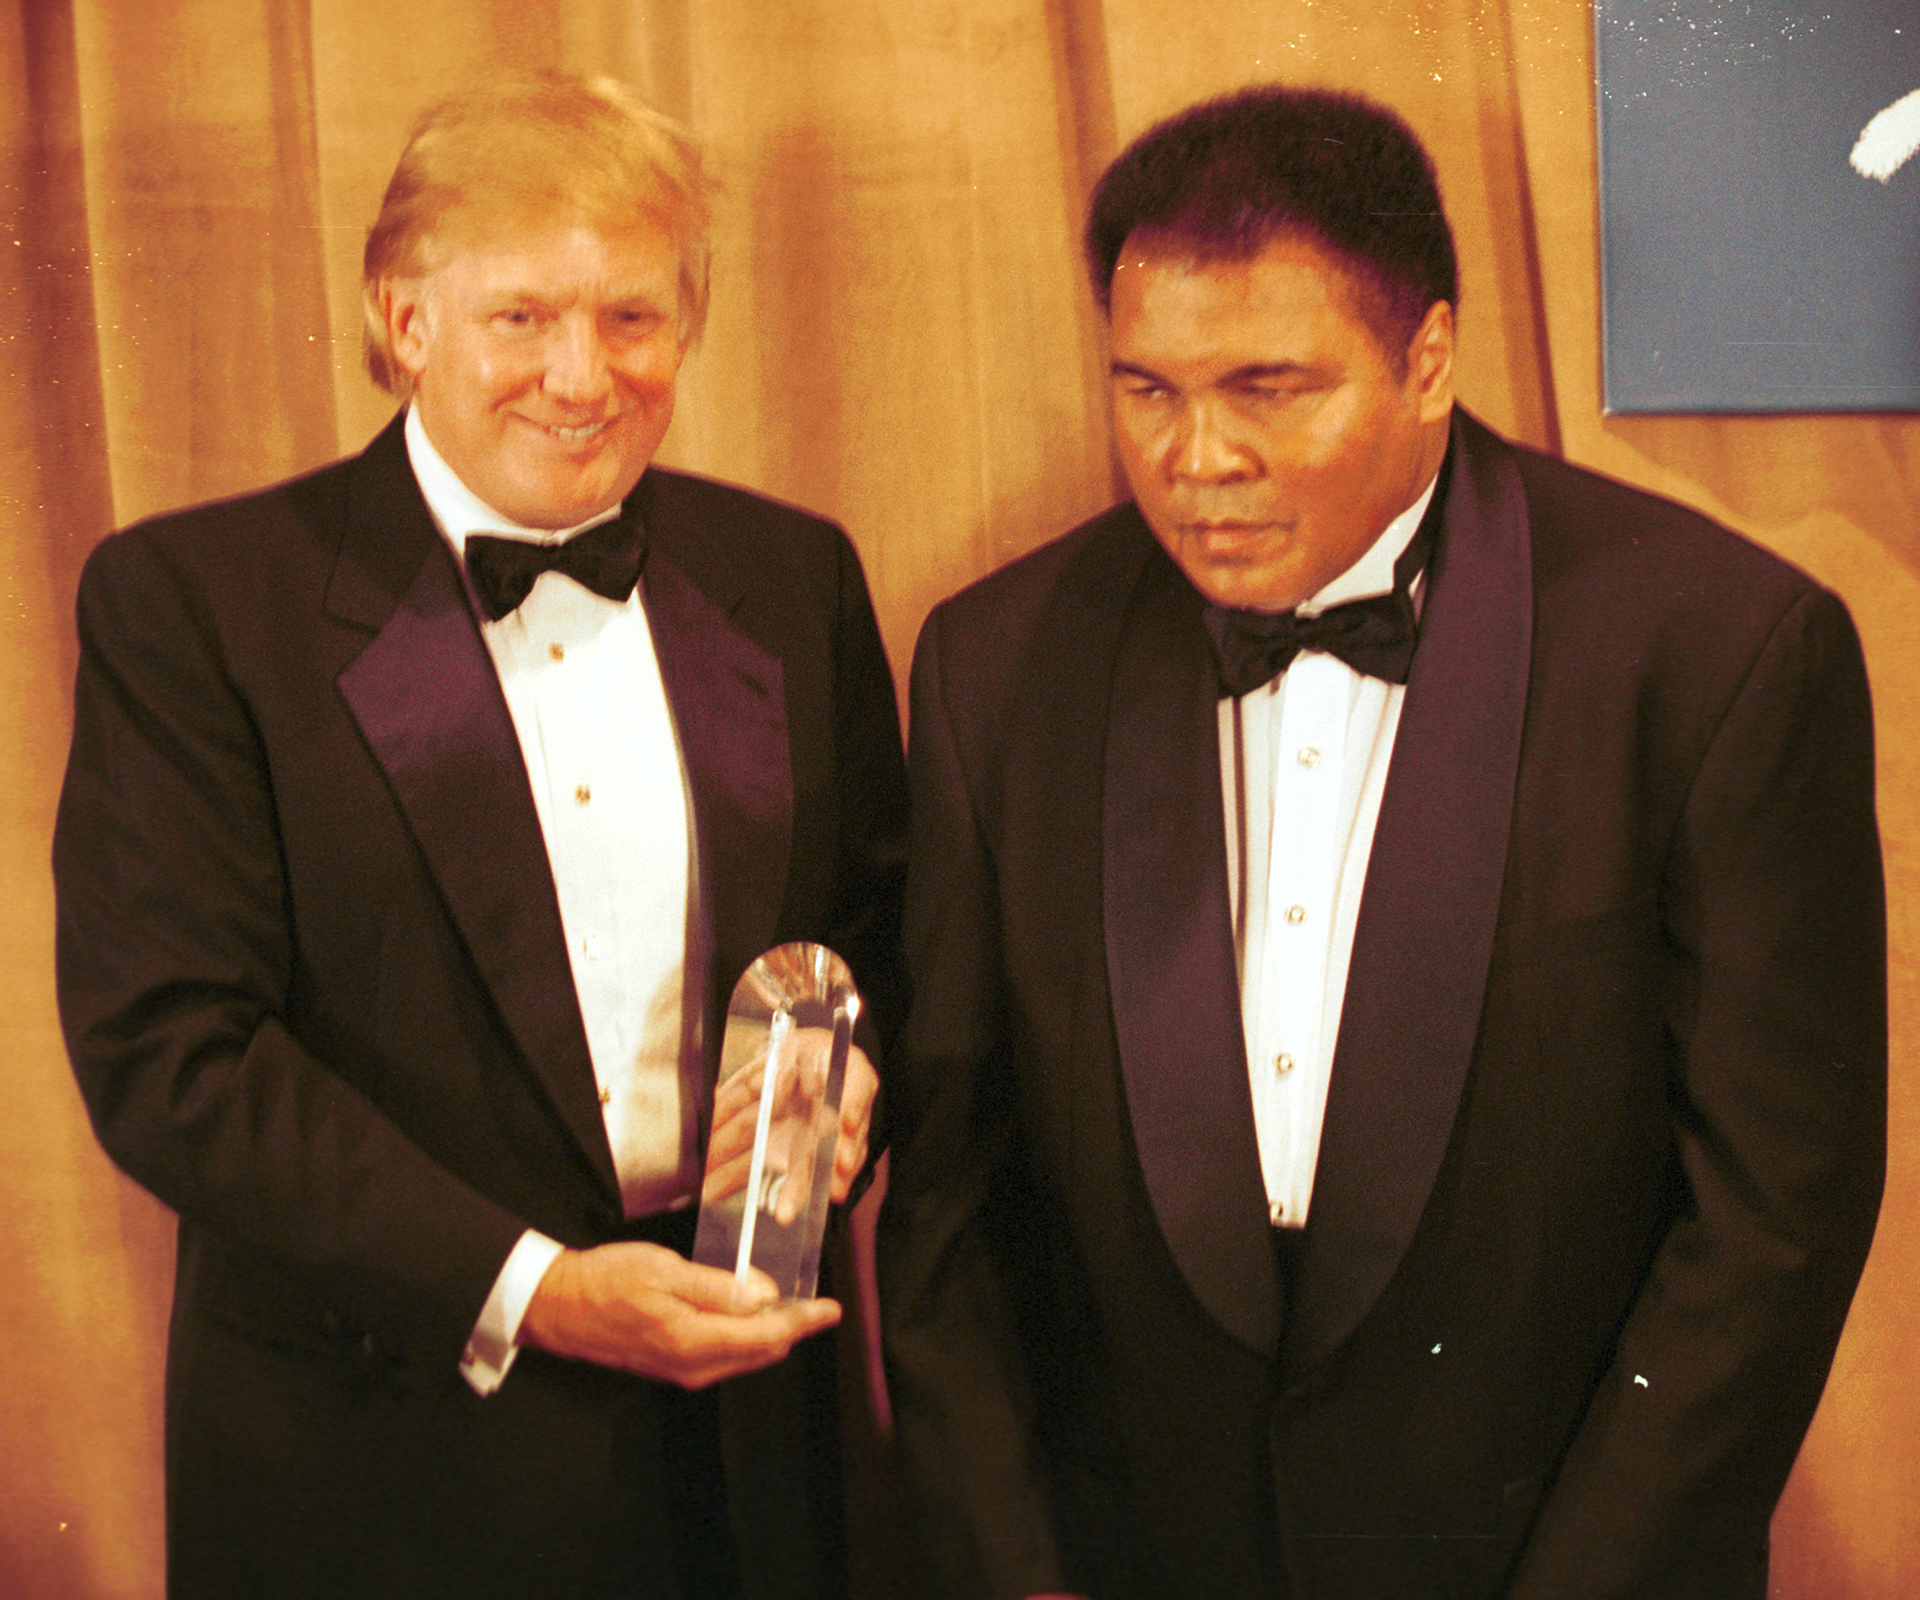 Muhammad Ali slams Donald Trump: “There is nothing Islamic about killing innocent people”